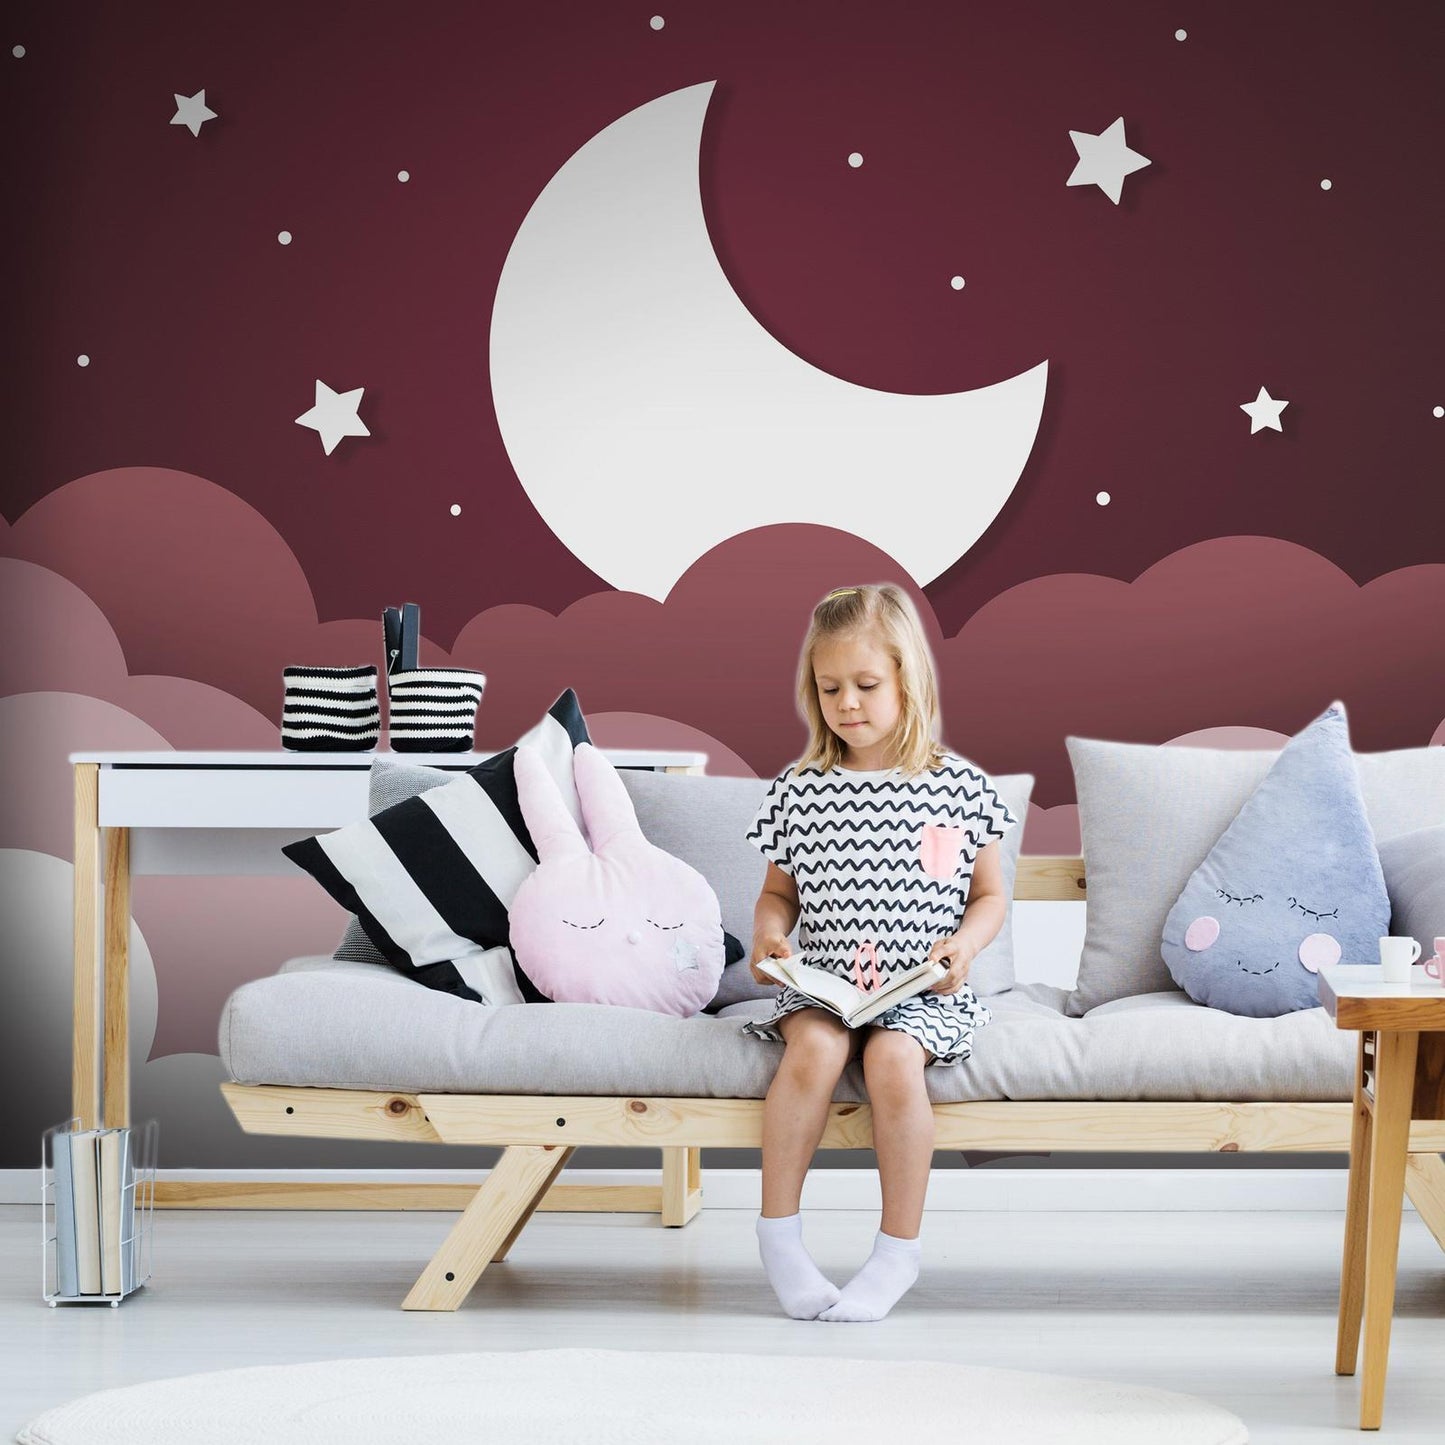 Fotobehang - Moon dream - clouds in a maroon sky with stars for children